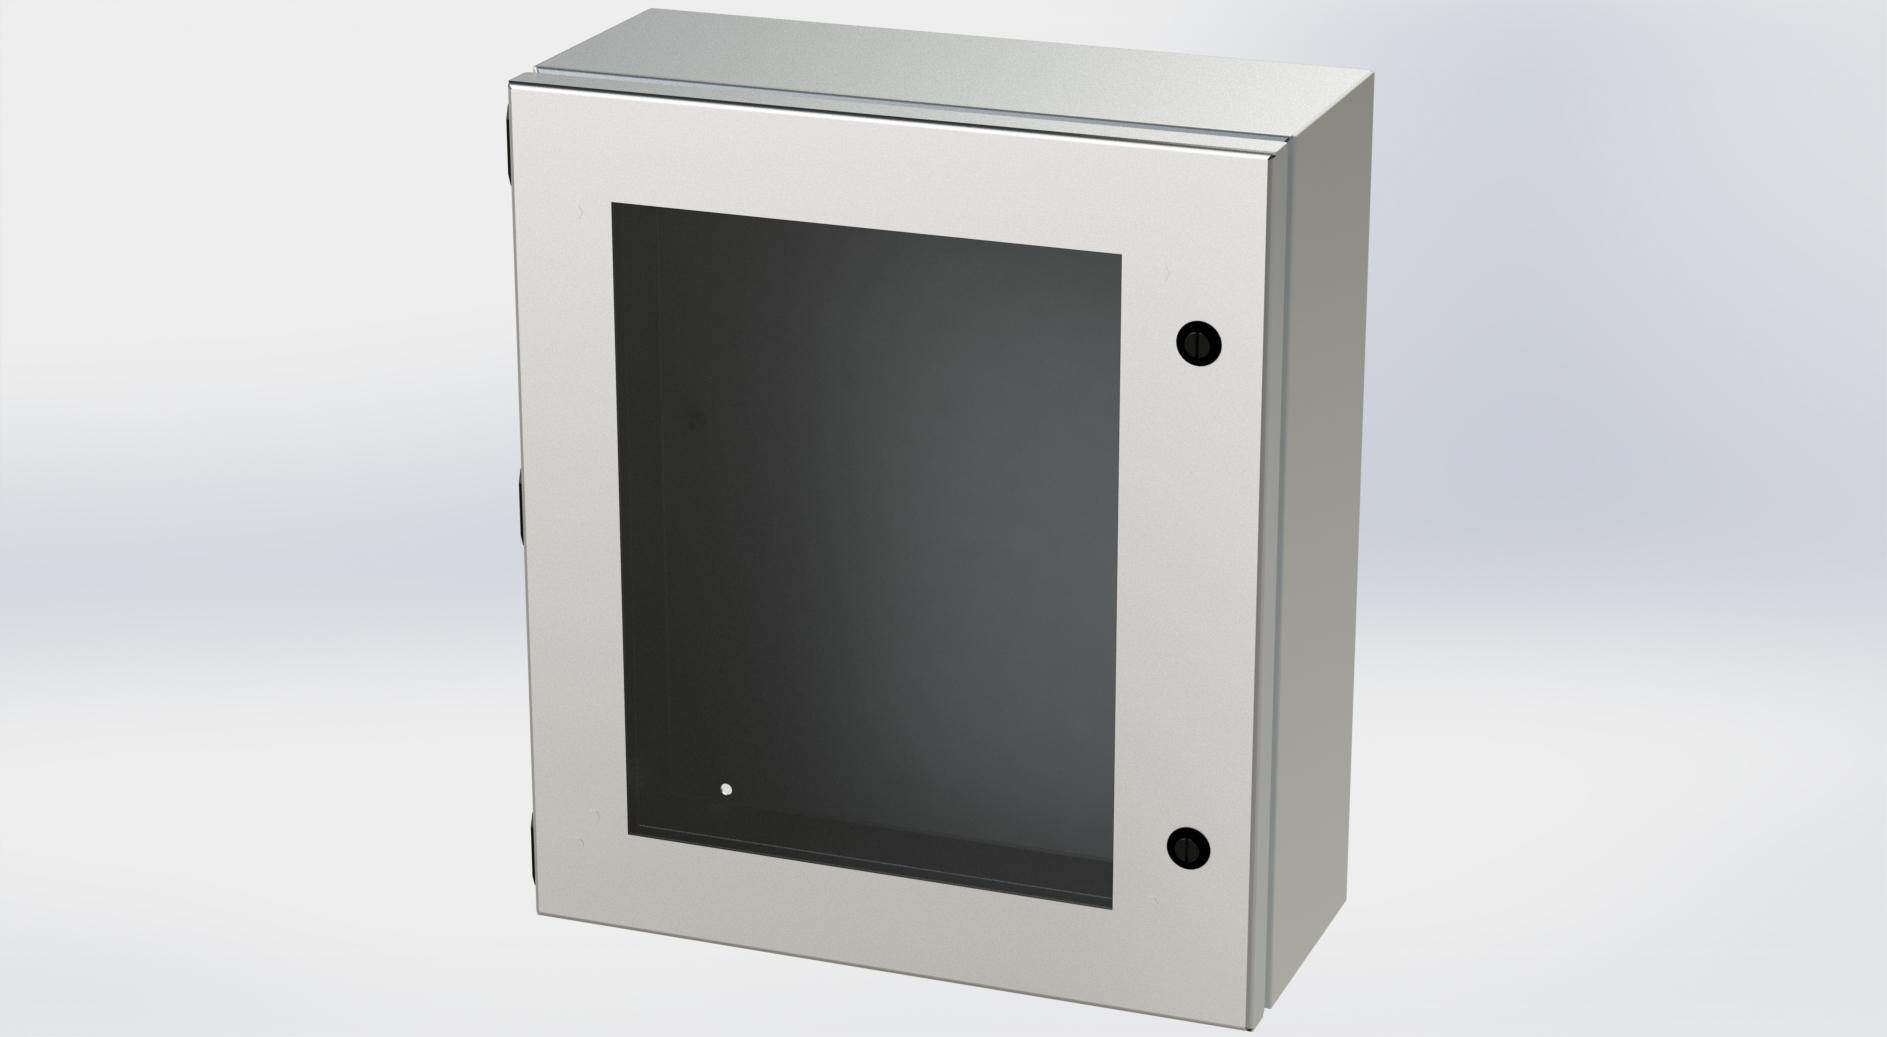 Saginaw Control SCE-1614ELJWSS S.S. ELJ Enclosure W/Viewing Window, Height:16.00", Width:14.00", Depth:6.00", #4 brushed finish on all exterior surfaces. Optional sub-panels are powder coated white.